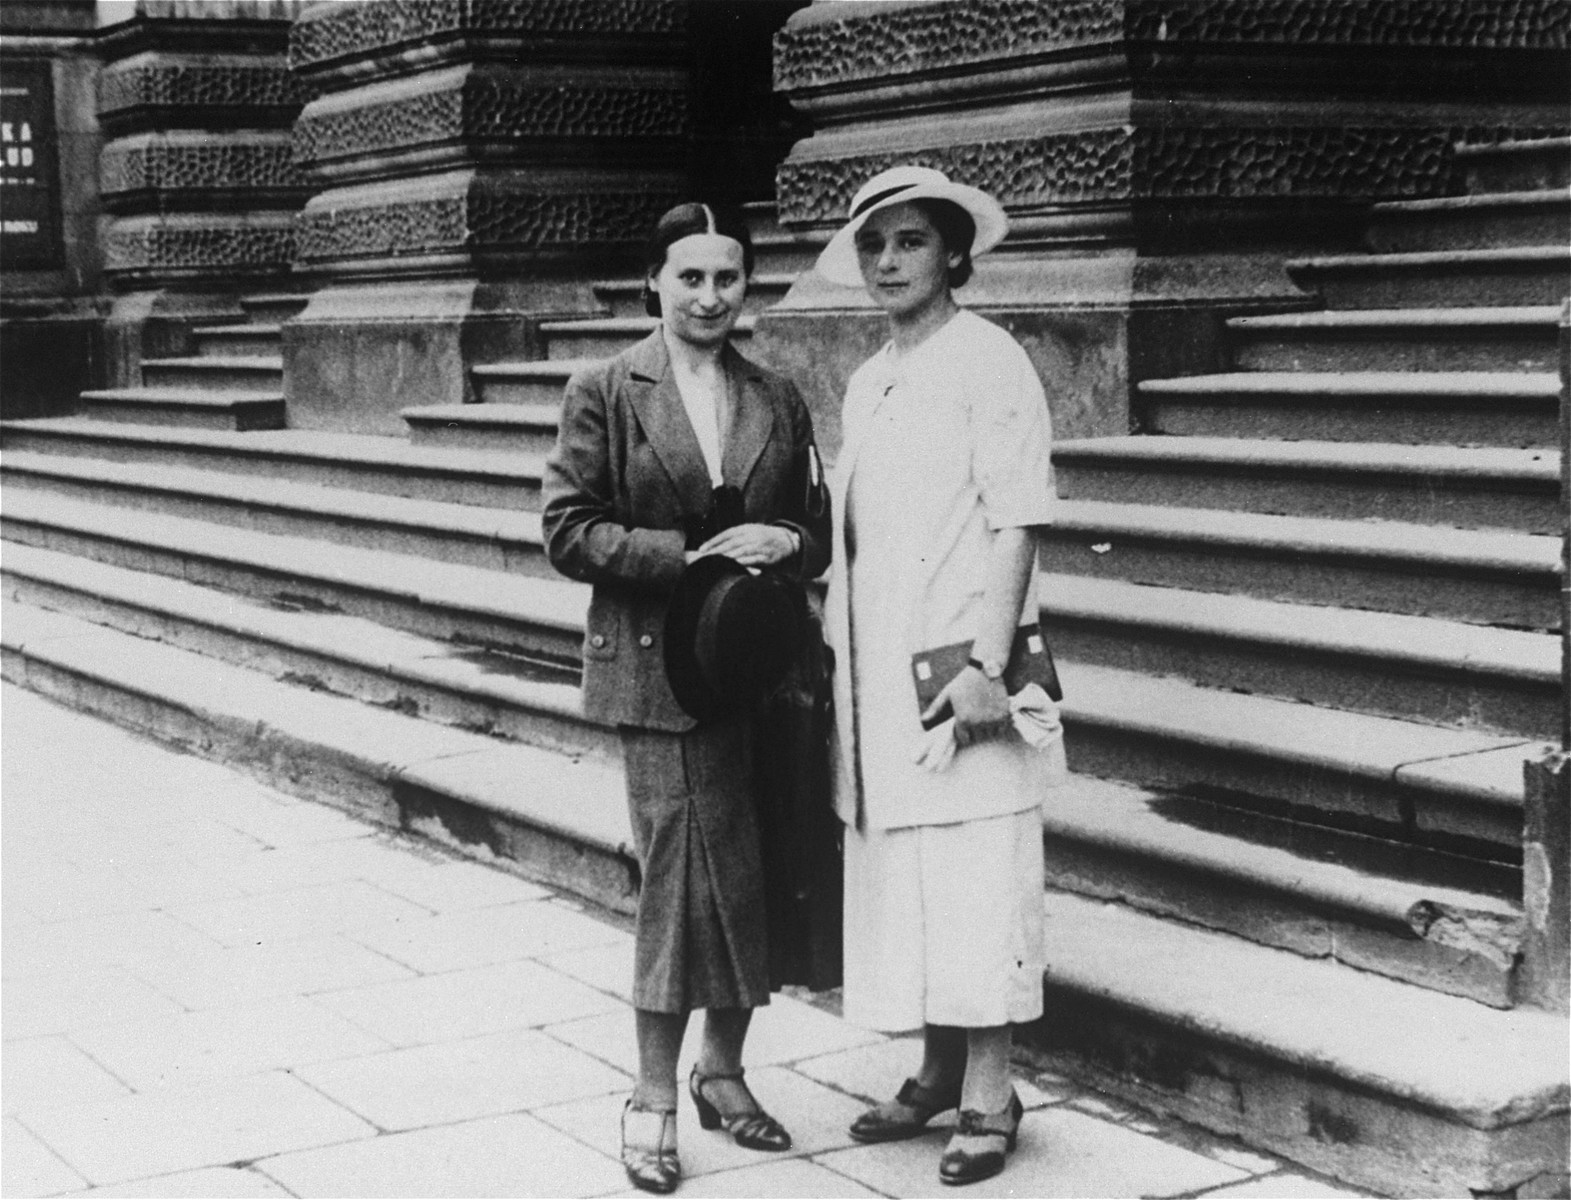 A young Jewish woman poses with a friend on the street in Warsaw, Poland.

Pictured is Yona Rudashevsky (right), the aunt of donor Cilia Rudashevsky.  Yona studied nursing in Vilna and then worked in a Jewish hospital in Warsaw.  In 1935 she immigrated to Palestine, where she worked as a nurse in the Belinson hospital.